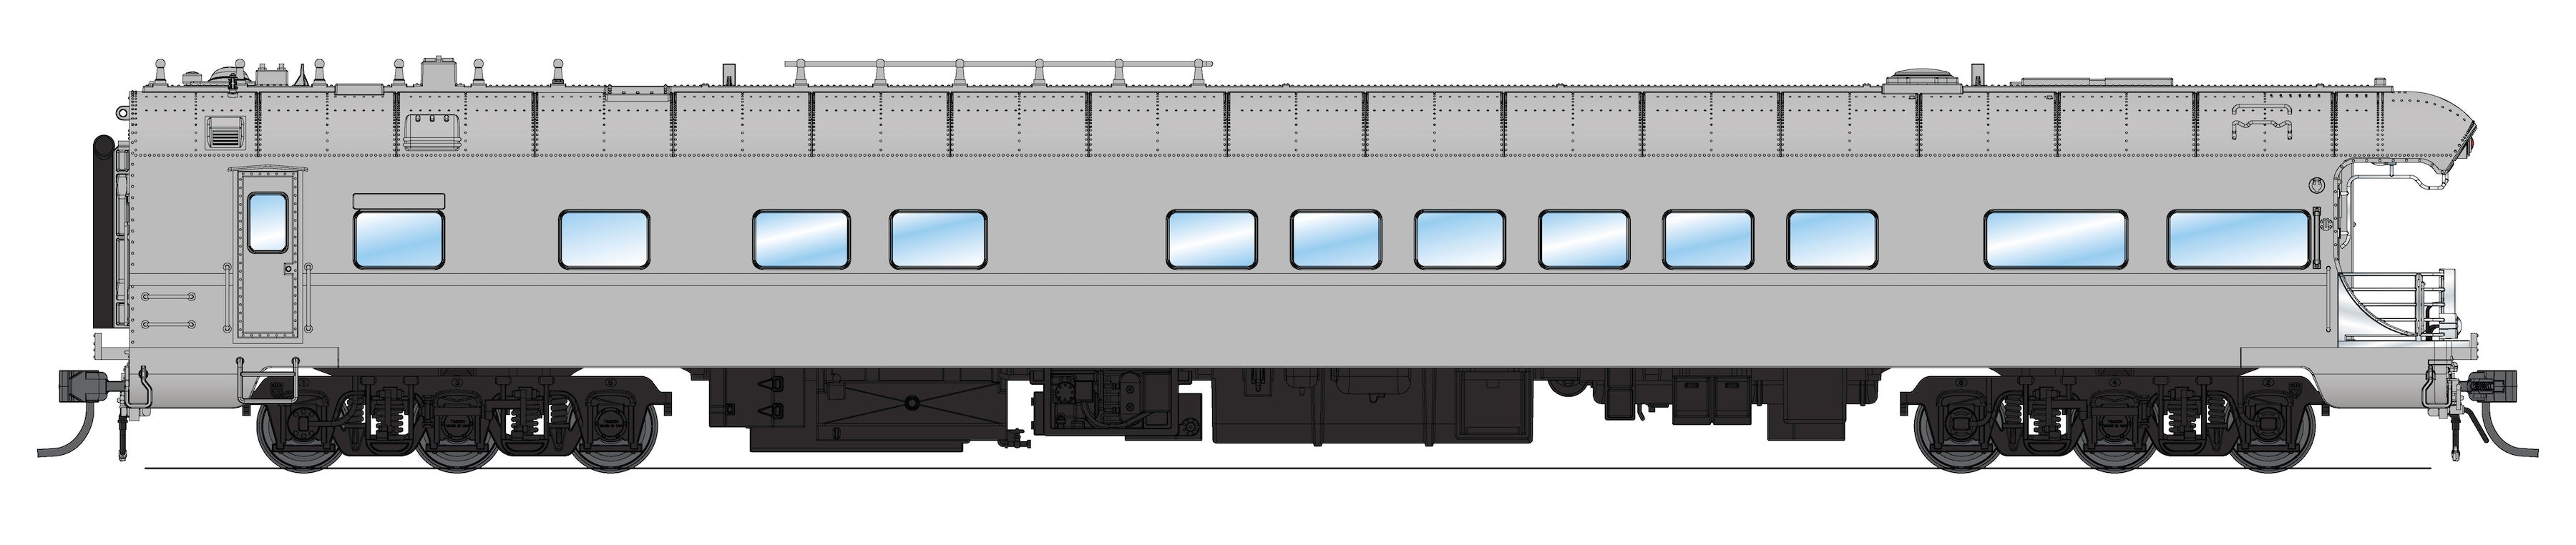 9016 Union Pacific Business Car, Painted Primer Gray w/ Black Trucks, HO Scale